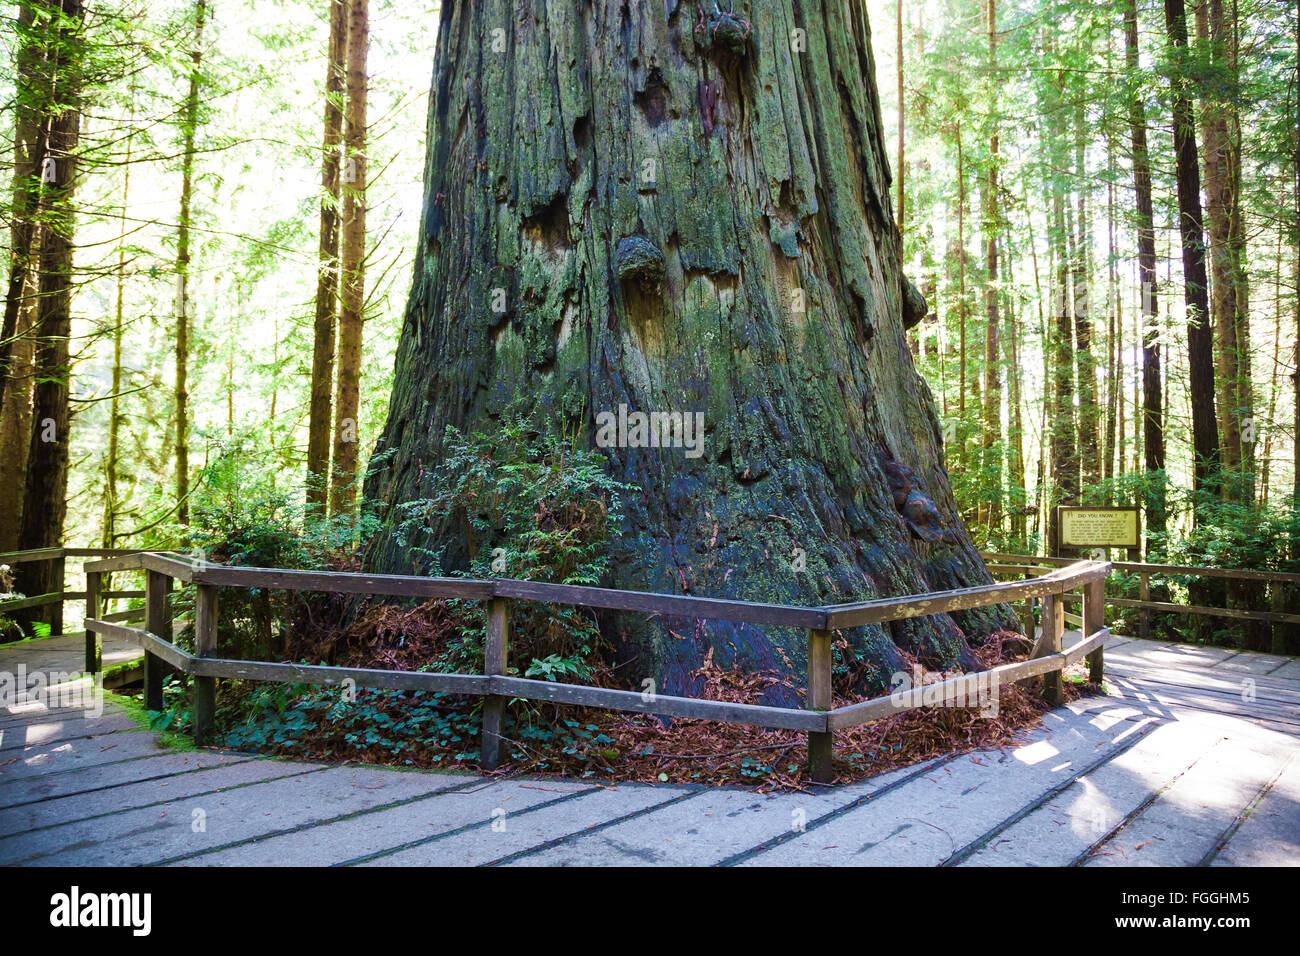 Massive sequoia redwood tree in the Redwoods National Forest in California. Stock Photo